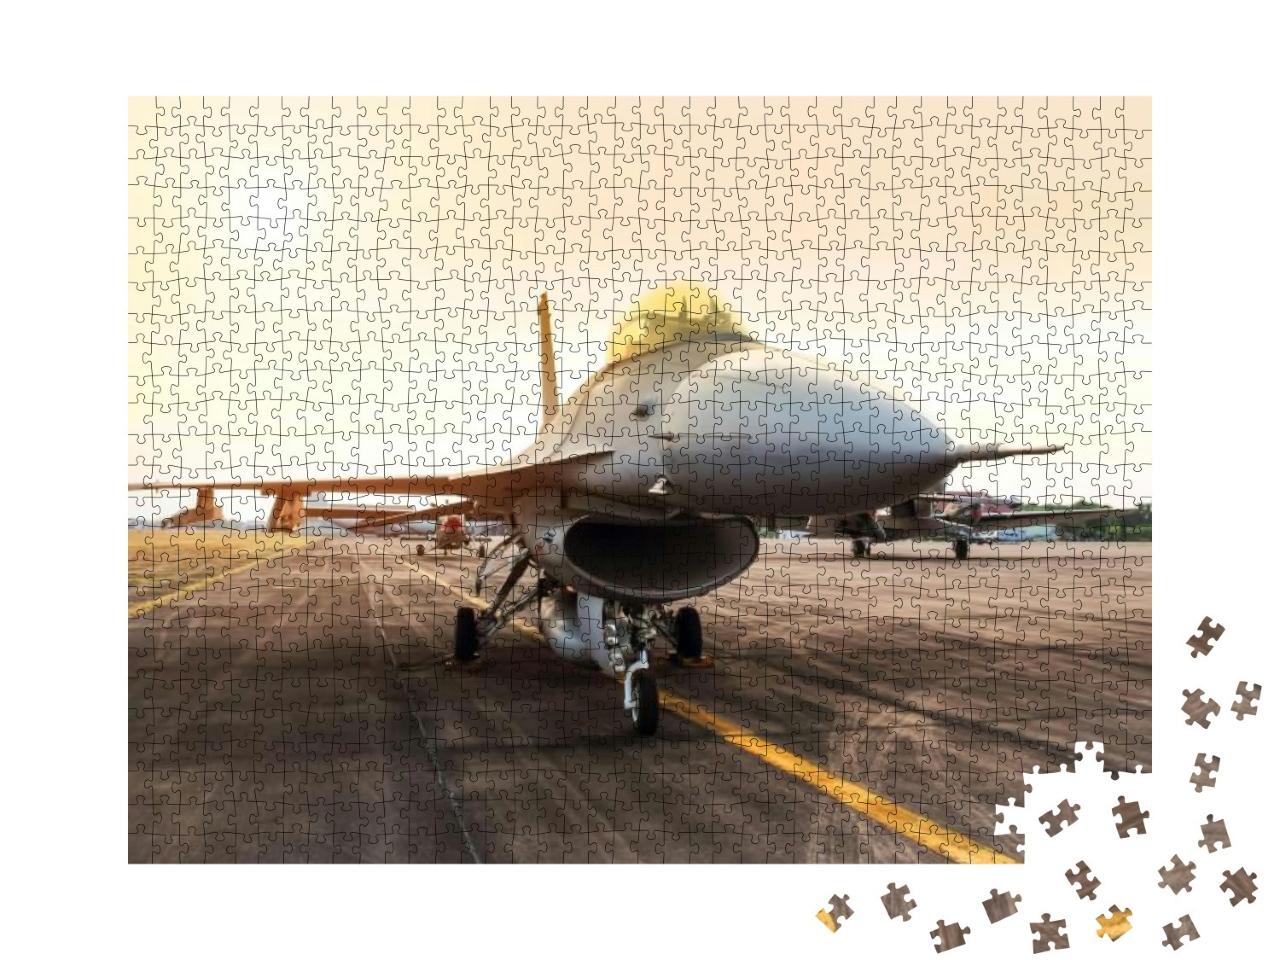 Military Fighter Jet Aircraft Parked in the Air Force on... Jigsaw Puzzle with 1000 pieces